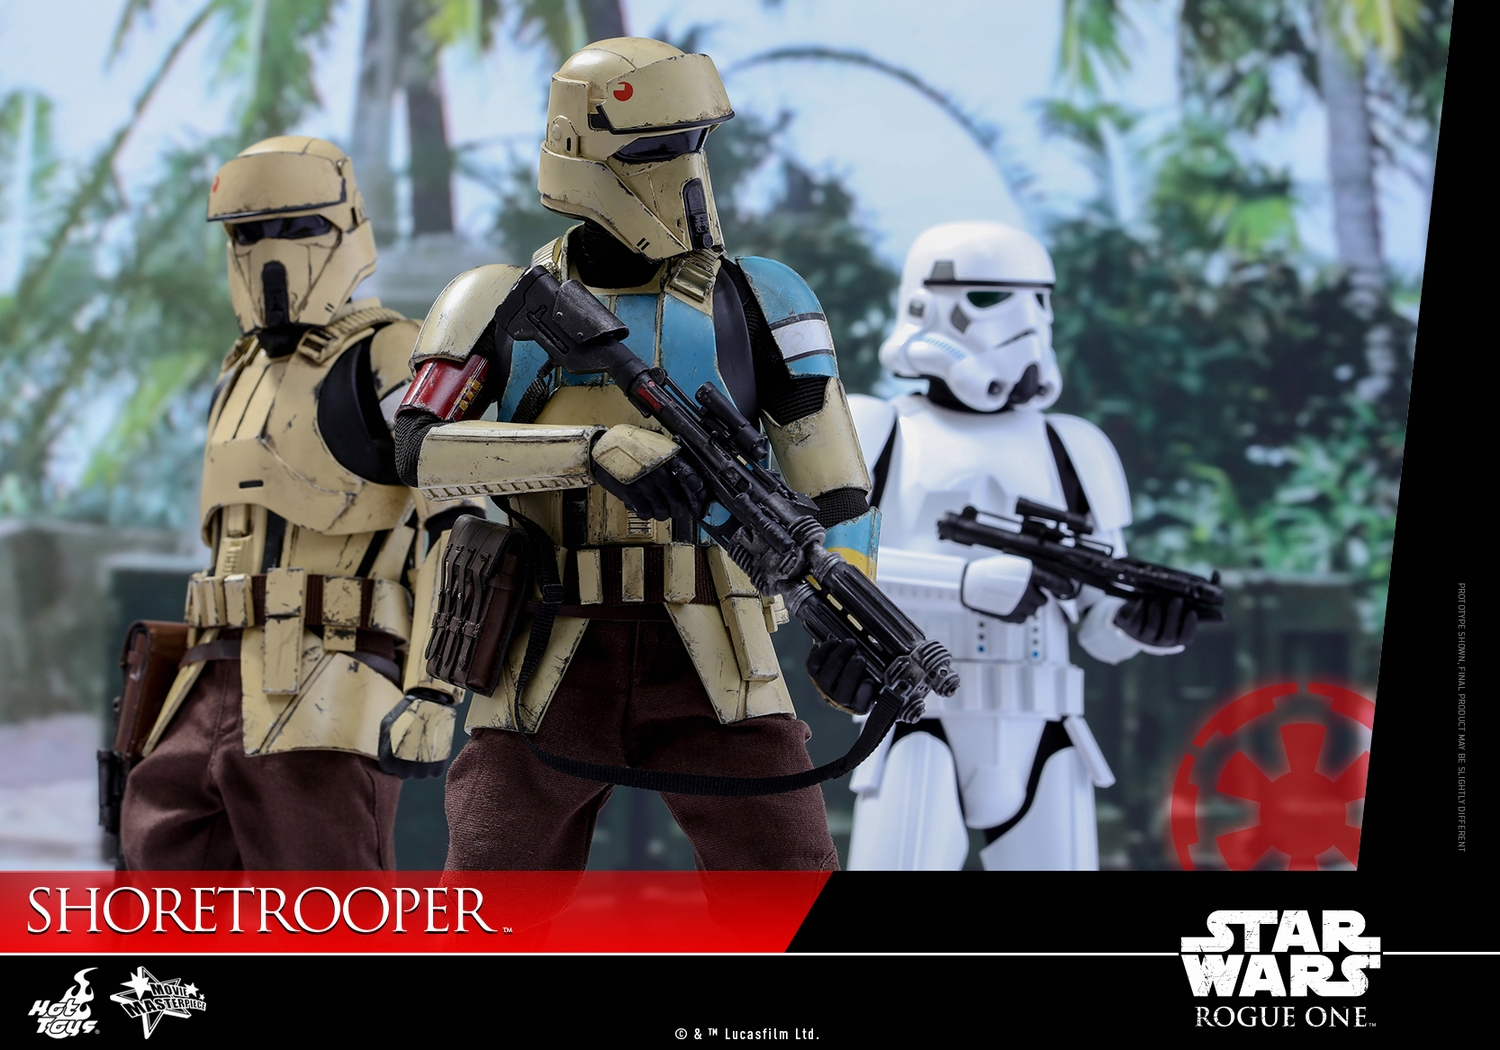 hot-toys-star-wars-rogue-one-shoretrooper-collectible-figure-092916-012.jpg